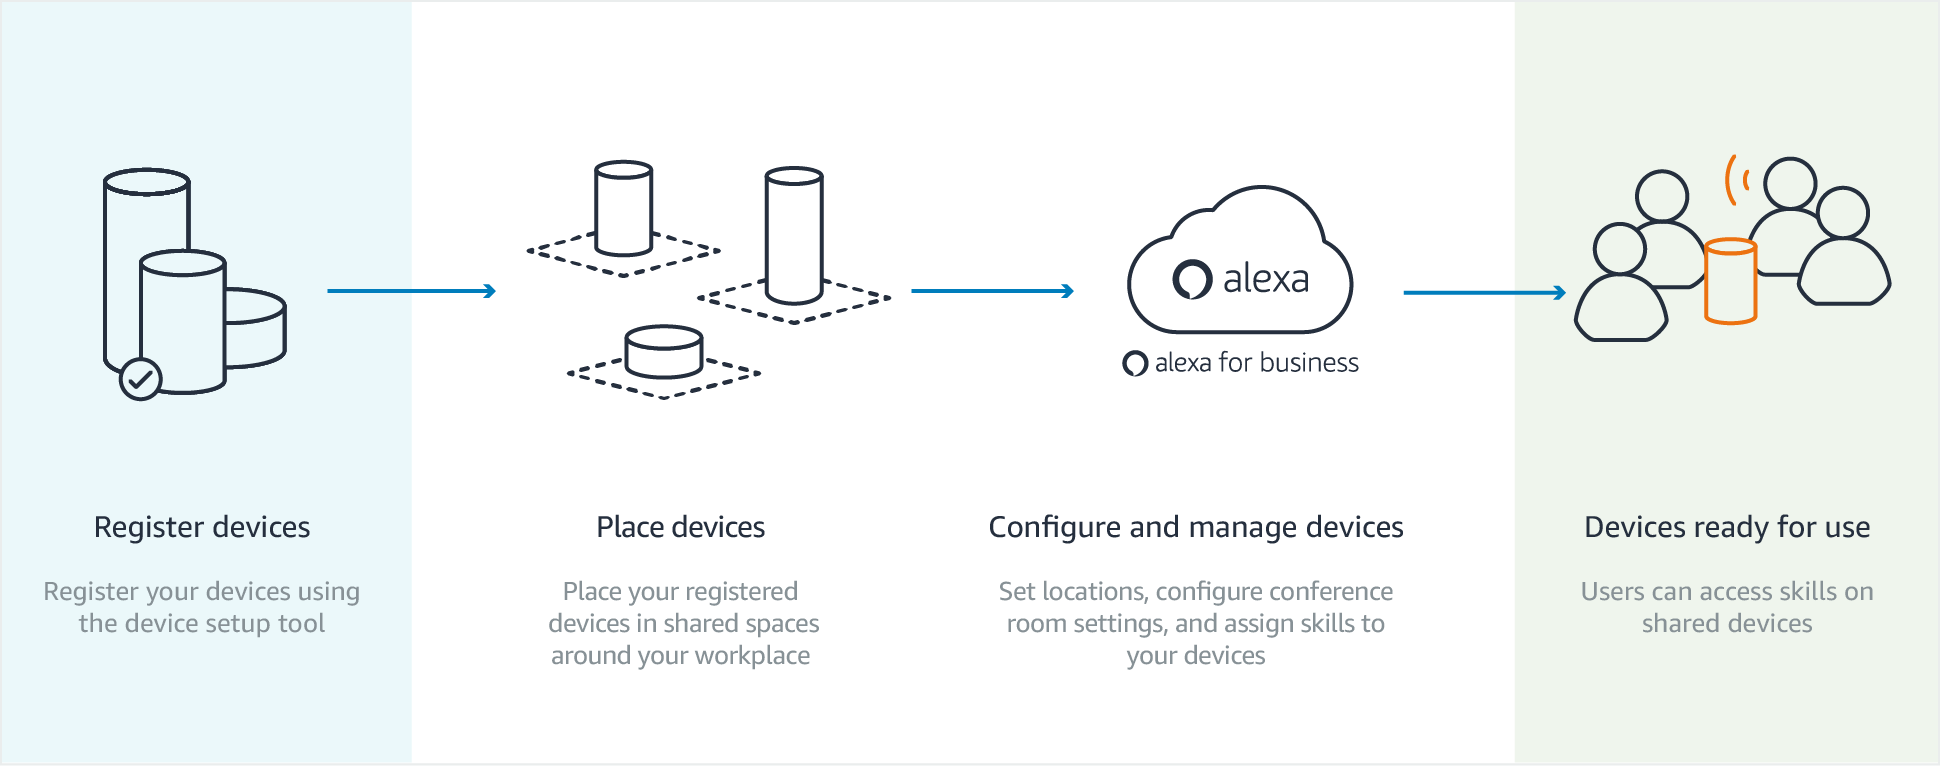 alexa-for-business_shared-devices